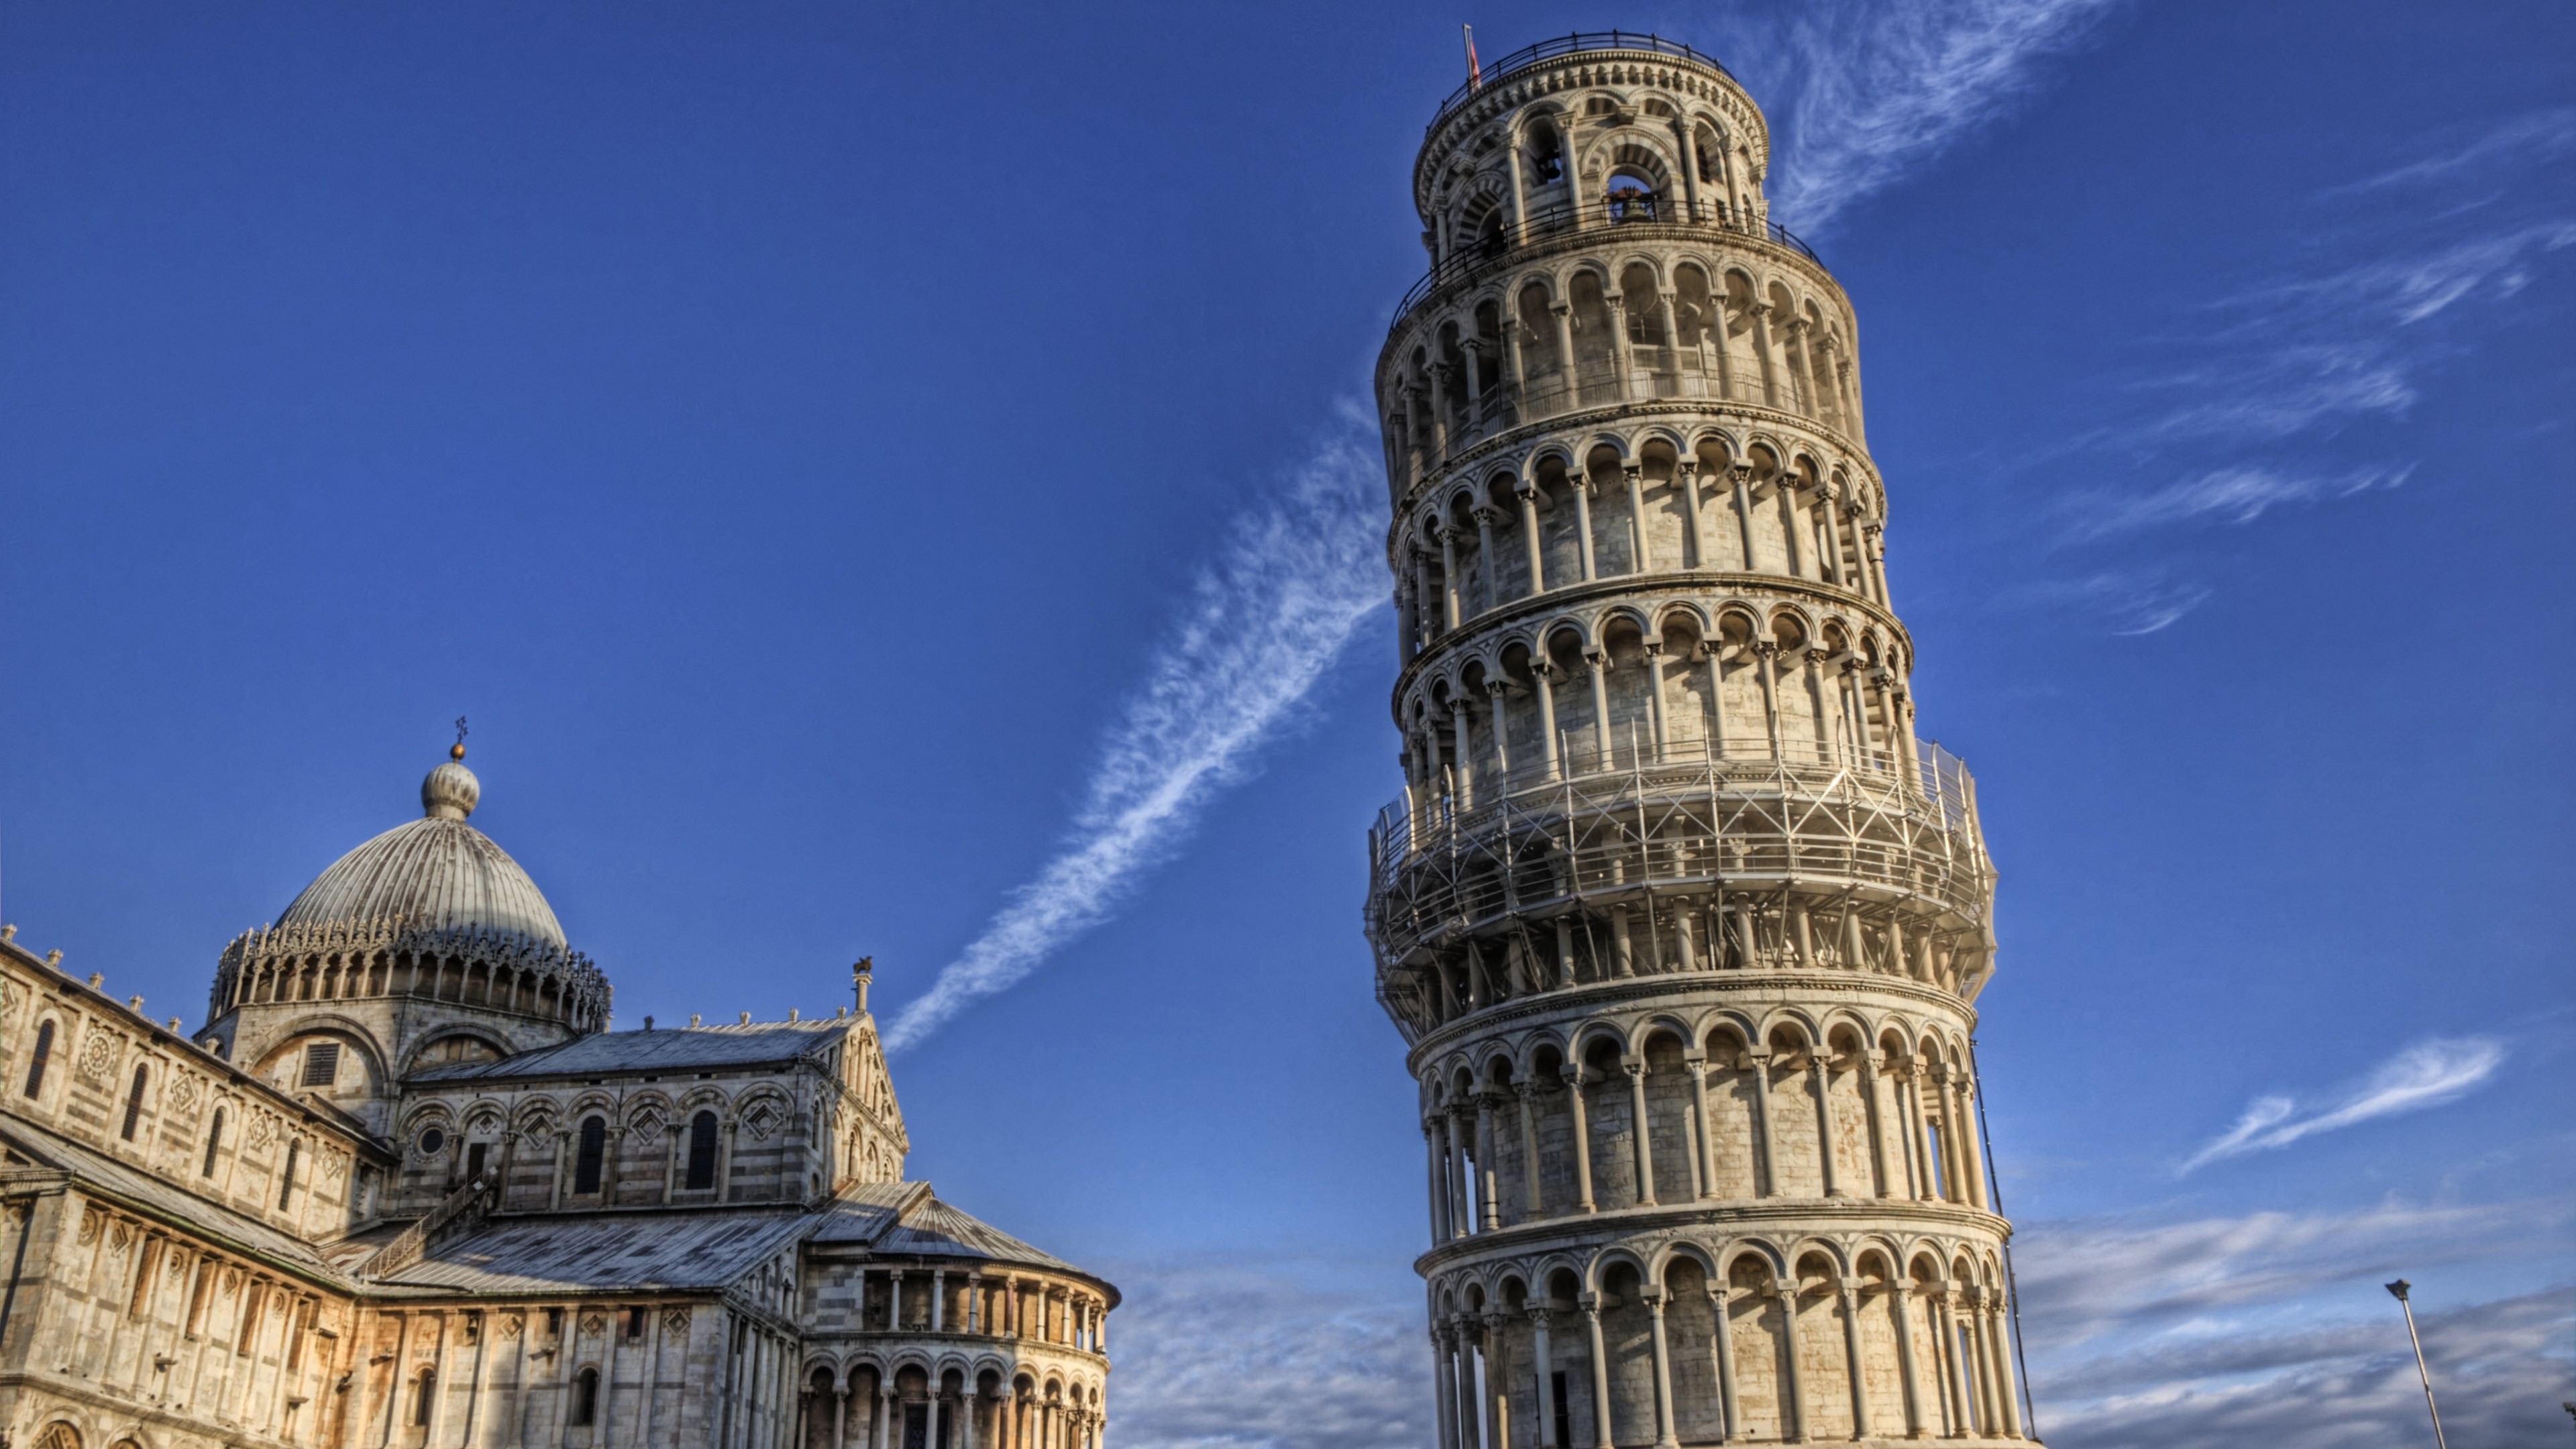 General 3840x2160 Italy building Leaning Tower of Pisa architecture construction history landmark Europe World Heritage Site